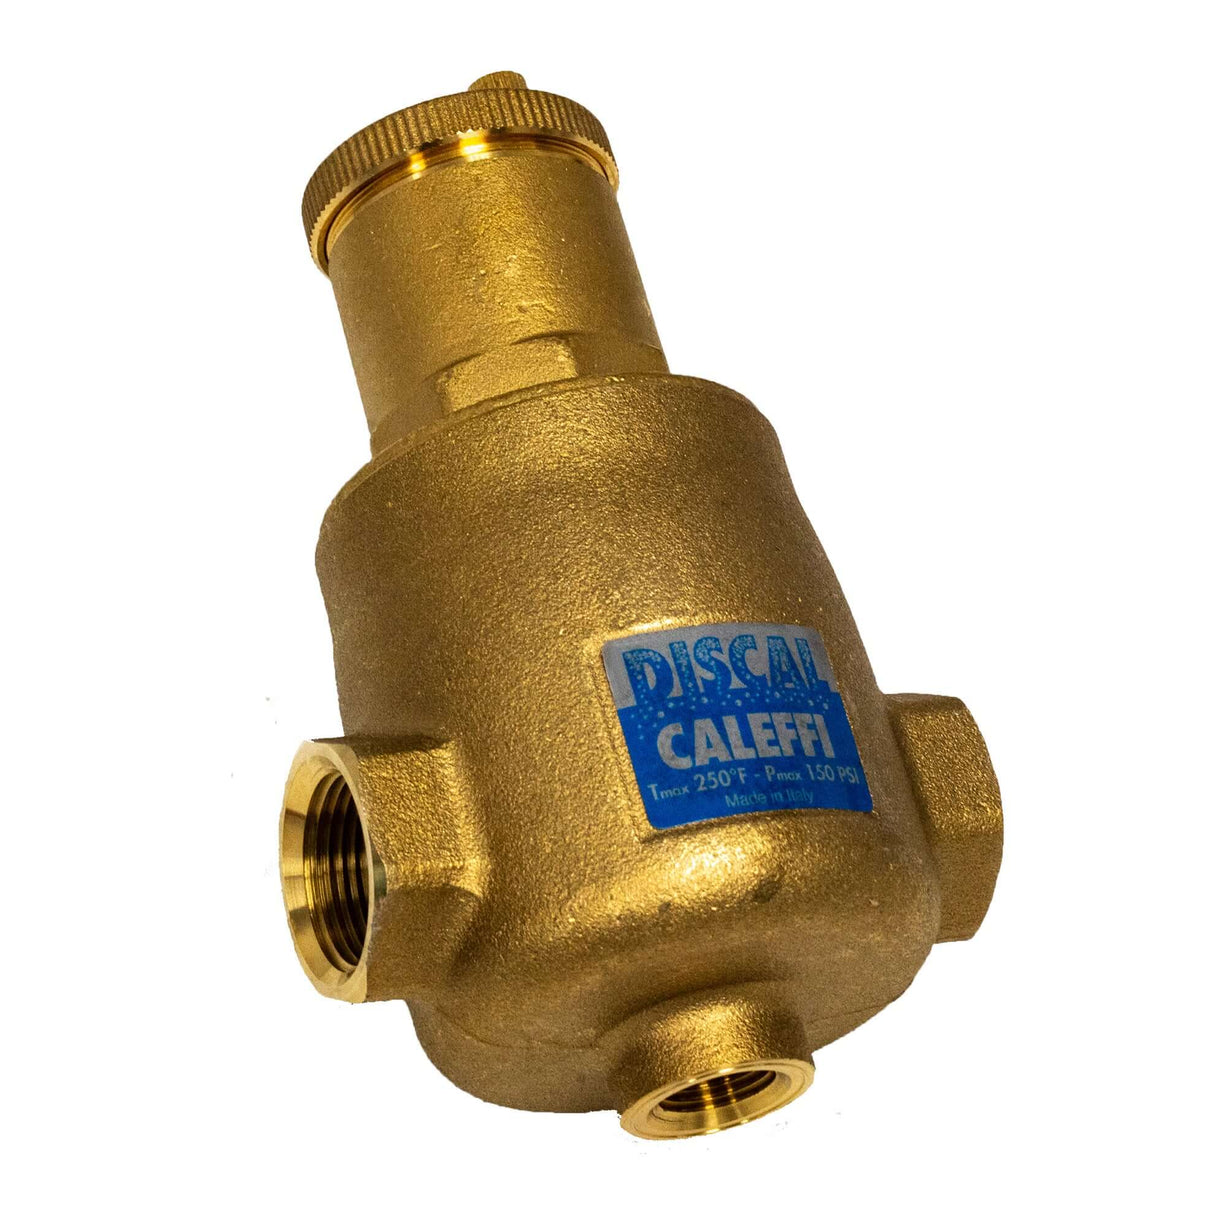 Top view of Caleffi 551006A Discal 1" Compact Air Separator - front